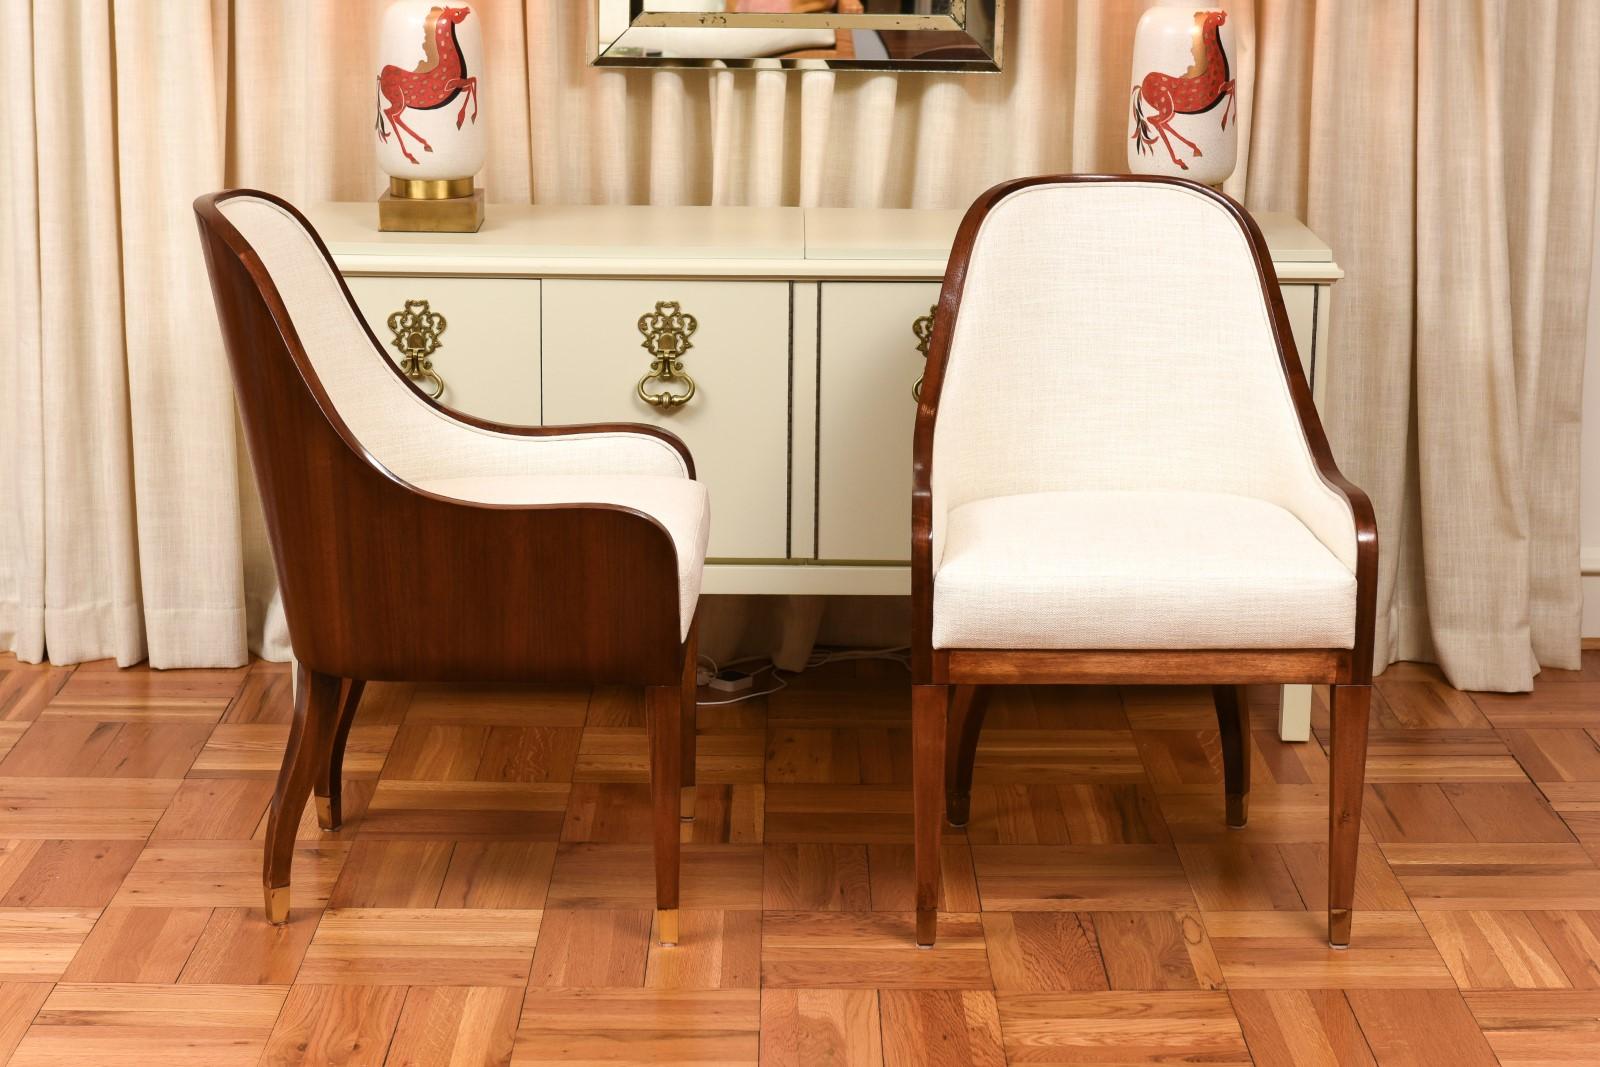 Spectacular Set of 10 Art Deco Revival Chairs in Bookmatch Figured Walnut For Sale 2